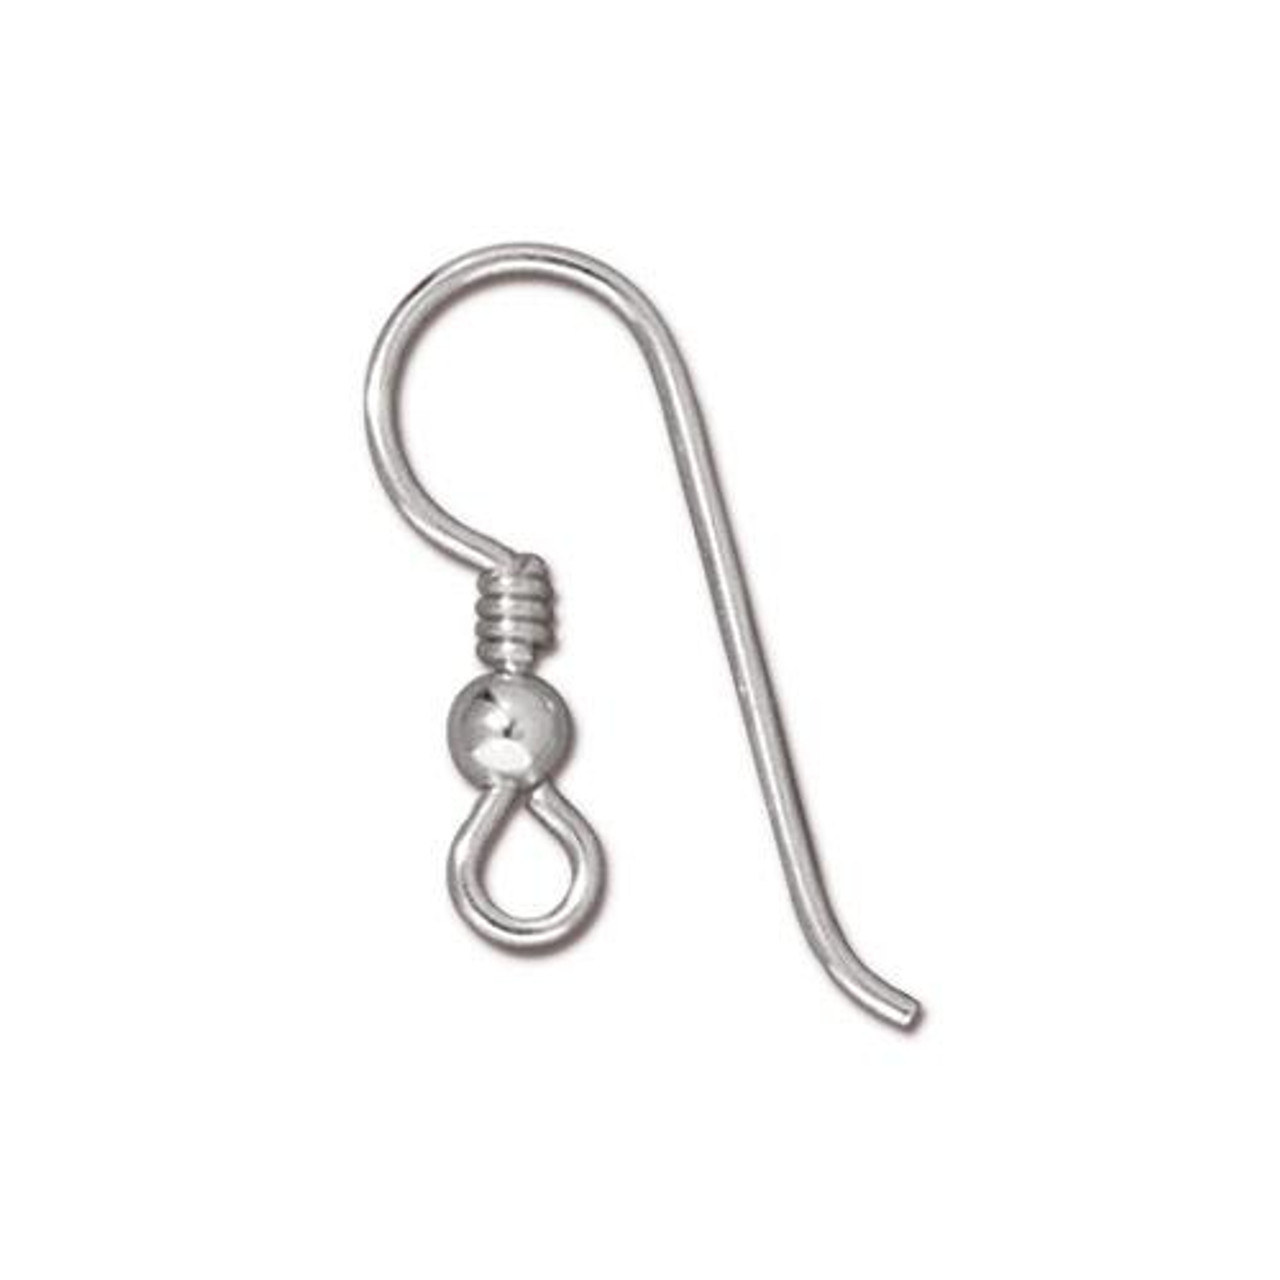 6 Solid Sterling Silver 925 Very Long Hook French Earring Earwire Hook 34  Mm1 1/3 Inches 18 Gauge Wire 